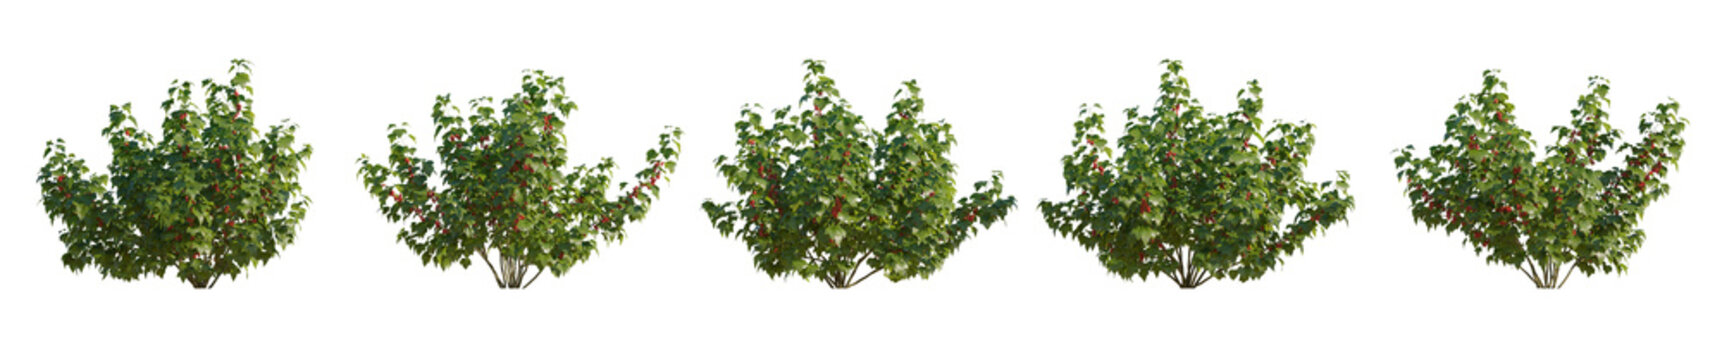 Set of currant red ribes rubrum bush shrub isolated png on a transparent background perfectly cutout
